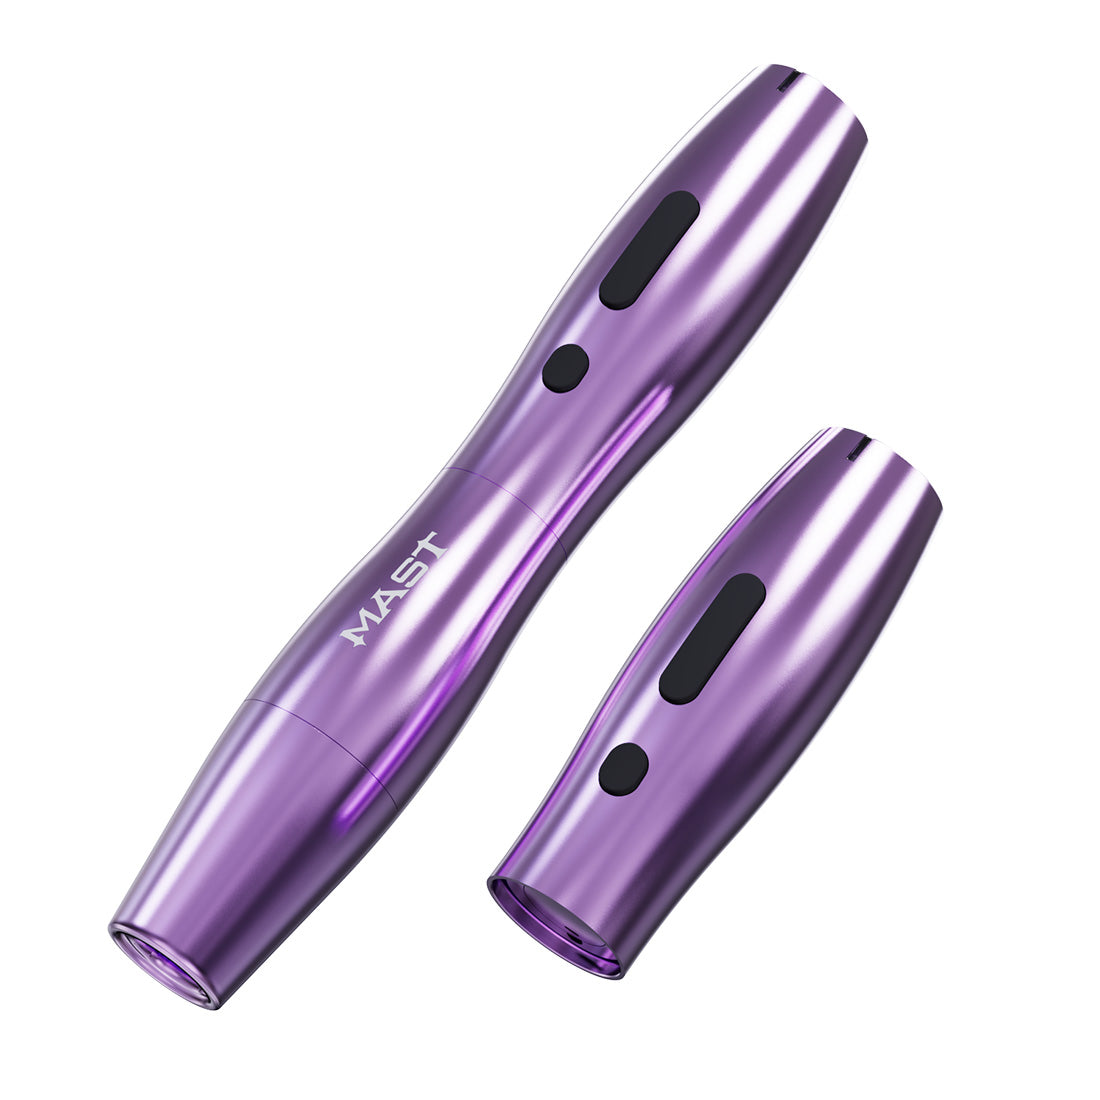 Mast P20 Wireless Pen Machine With 2.5MM Stroke With Two Batteries